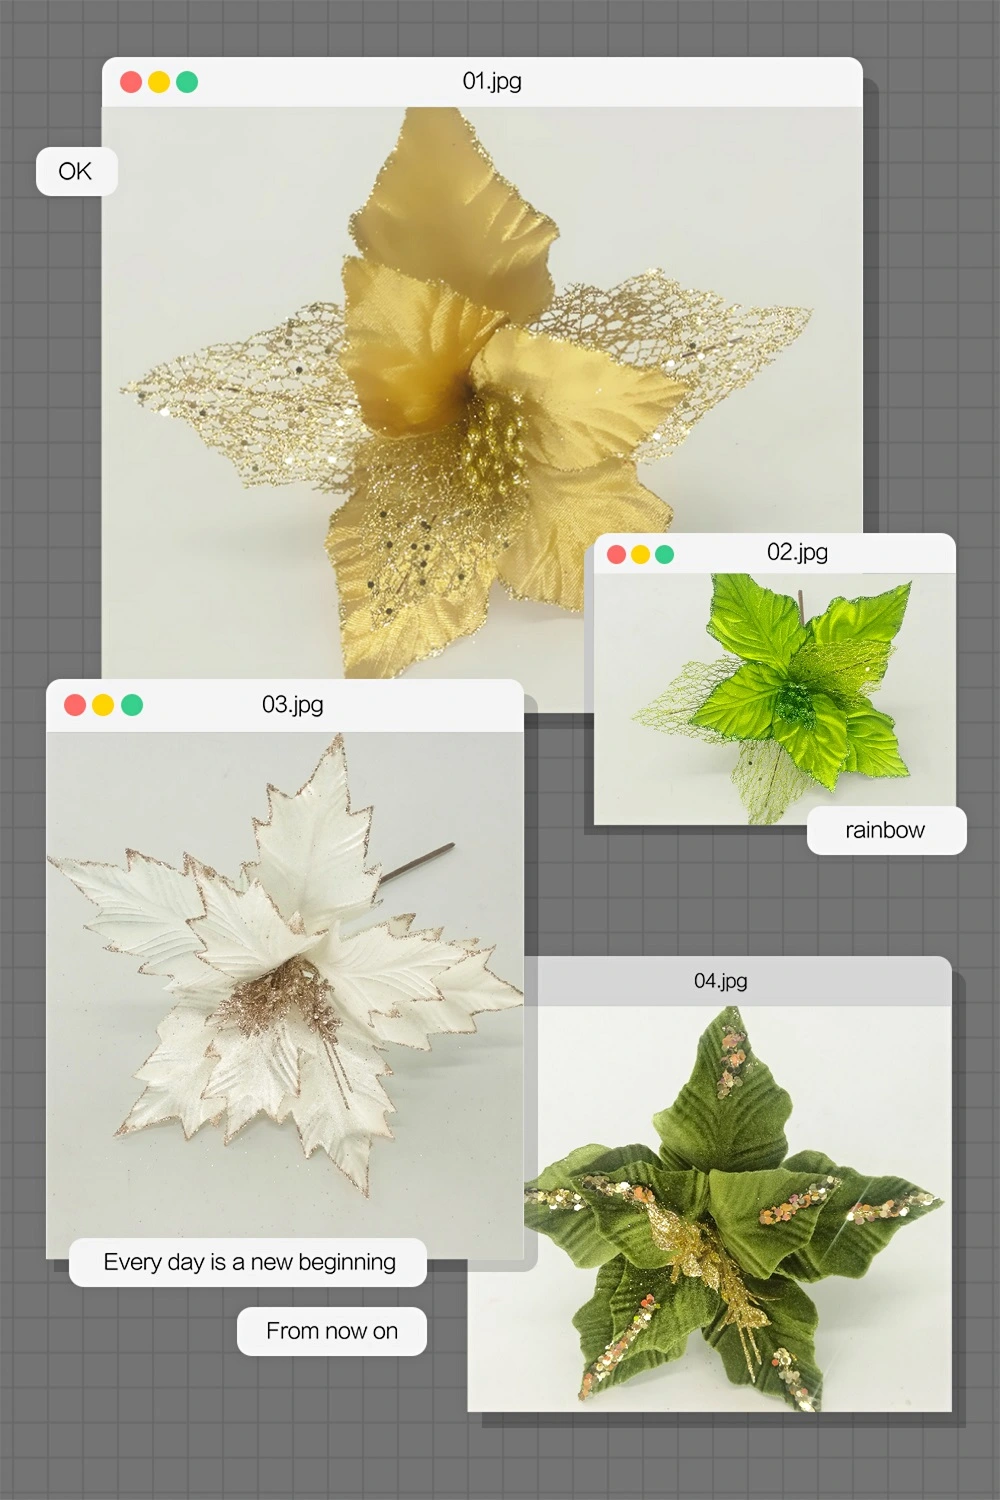 High Quality Christmas Decoration Beautiful Artificial Flowers